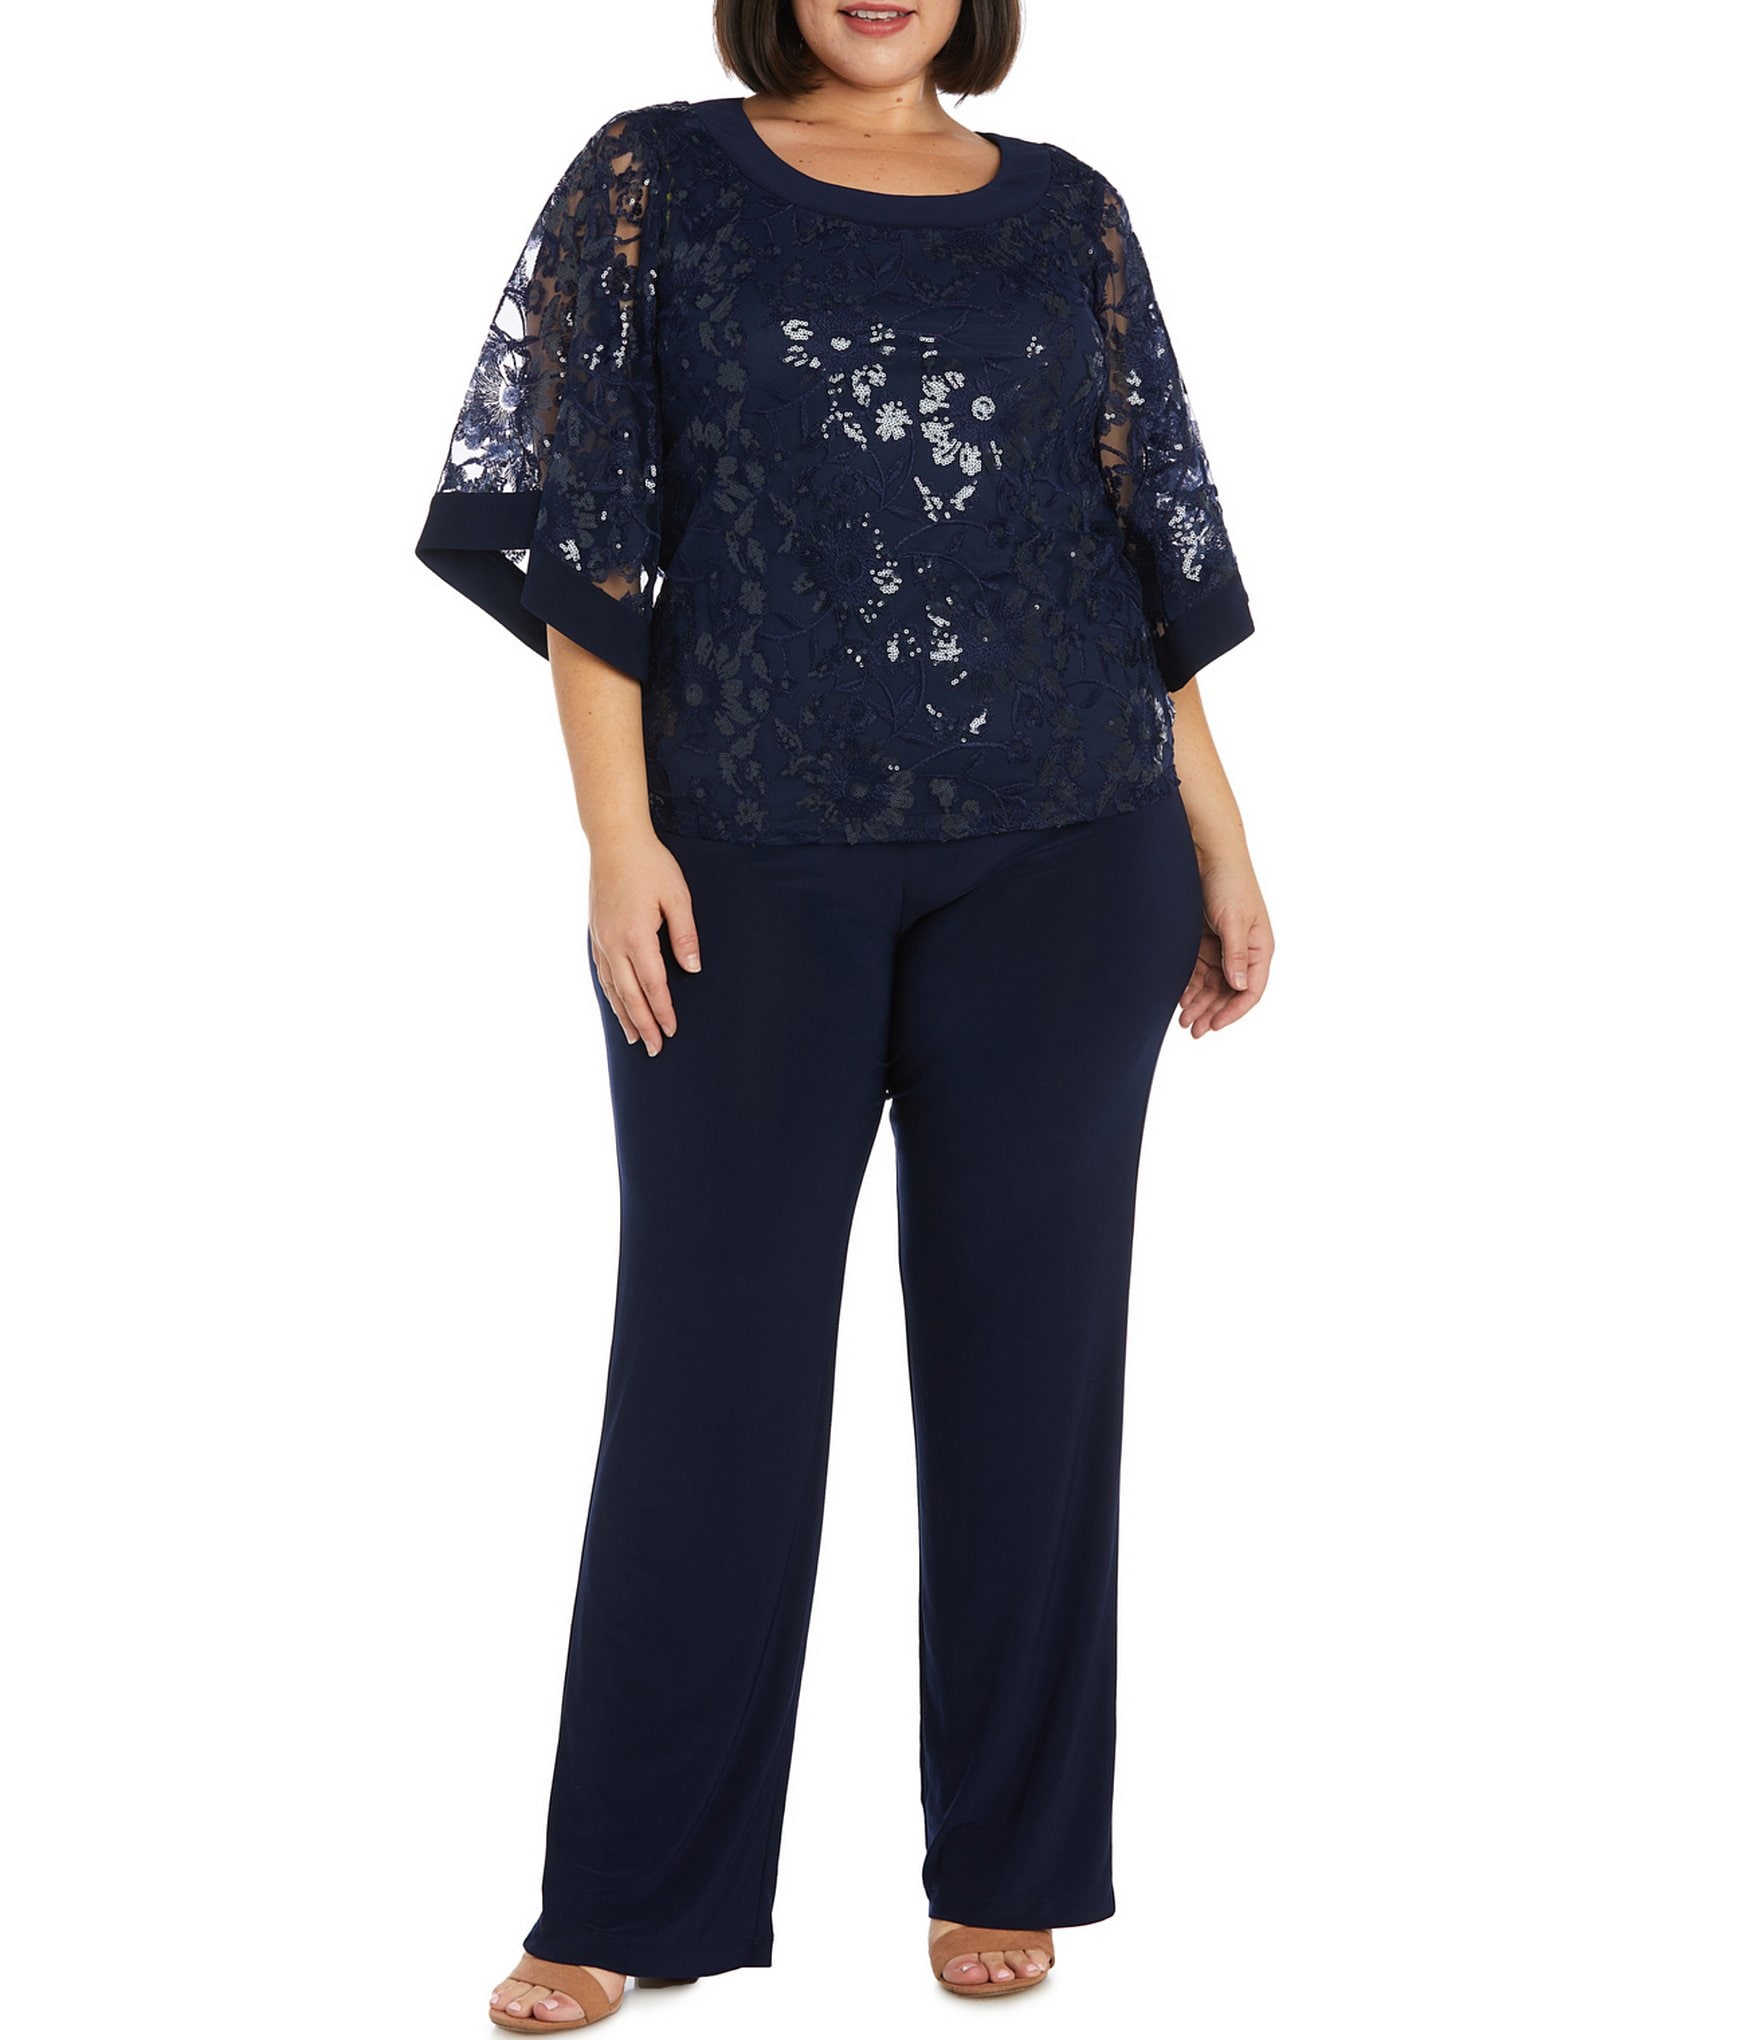 Plus-Size Formal & Evening Tops